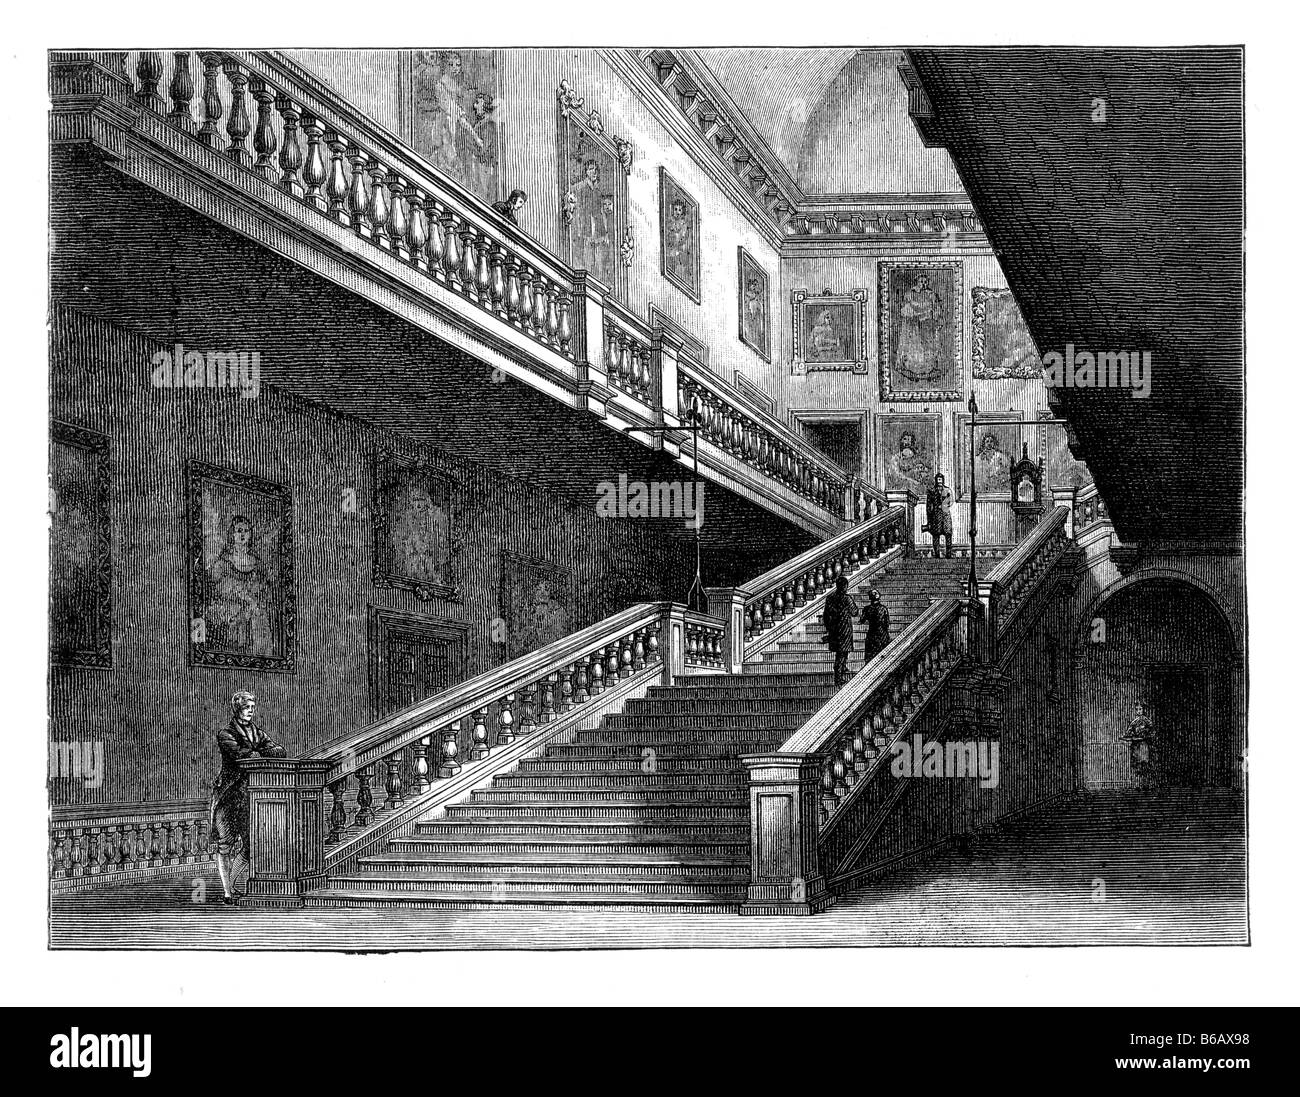 Althorp House Northamptonshire England Interior The Grand Staircase 19th Century Illustration Stock Photo